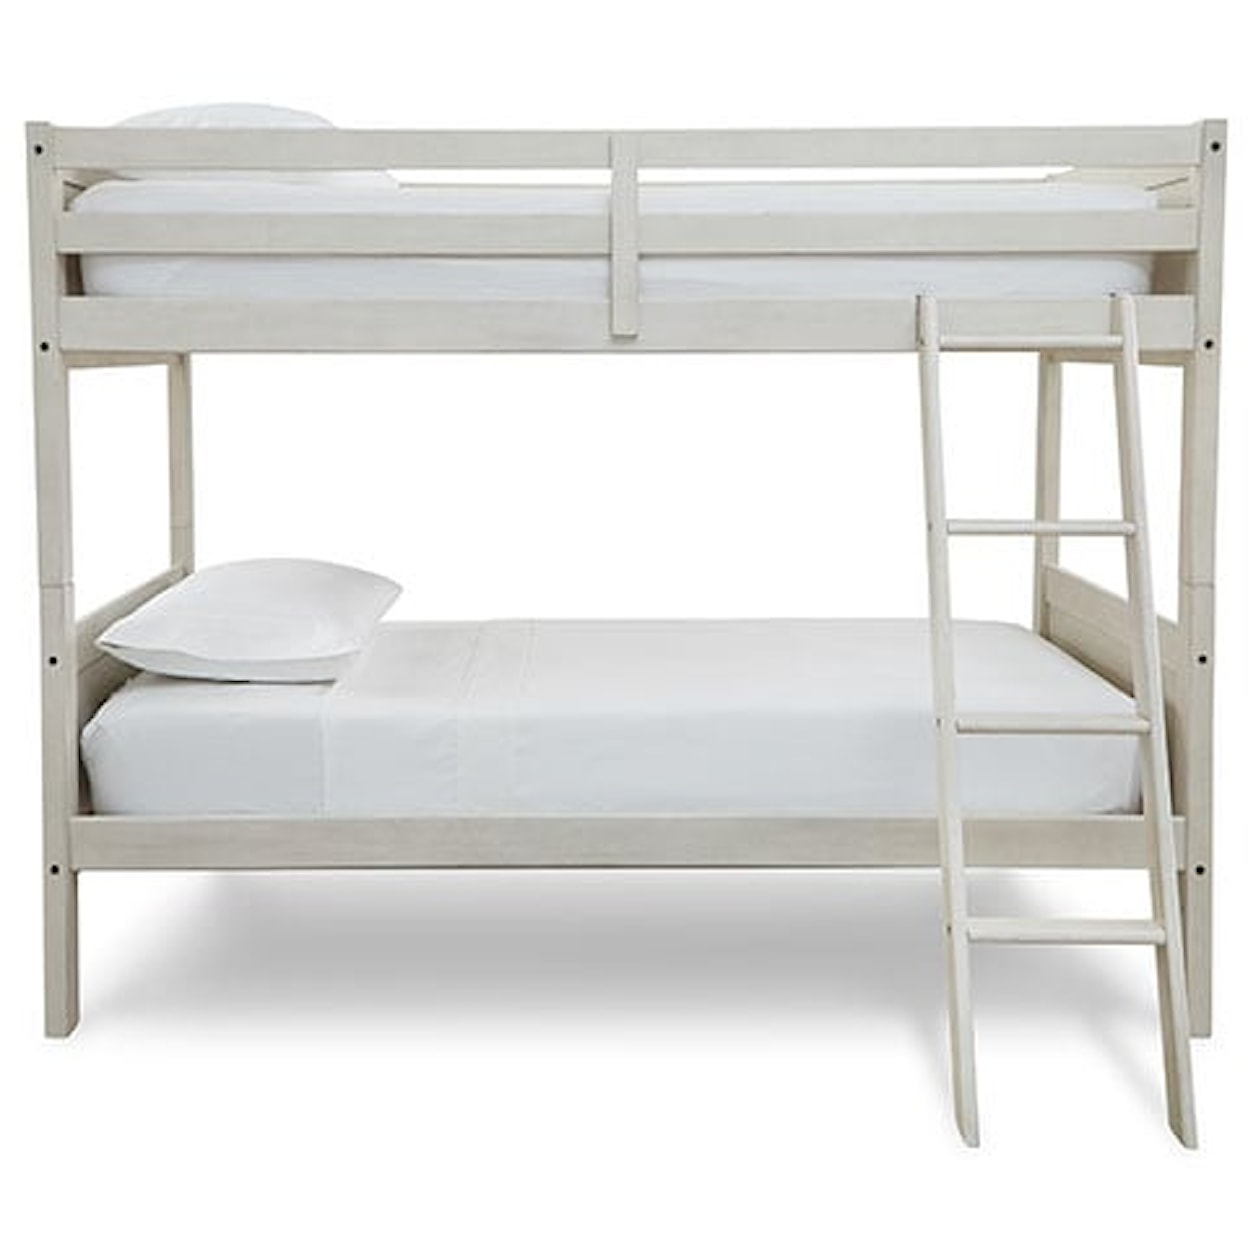 Signature Design by Ashley Robbinsdale Twin Bunk Bed